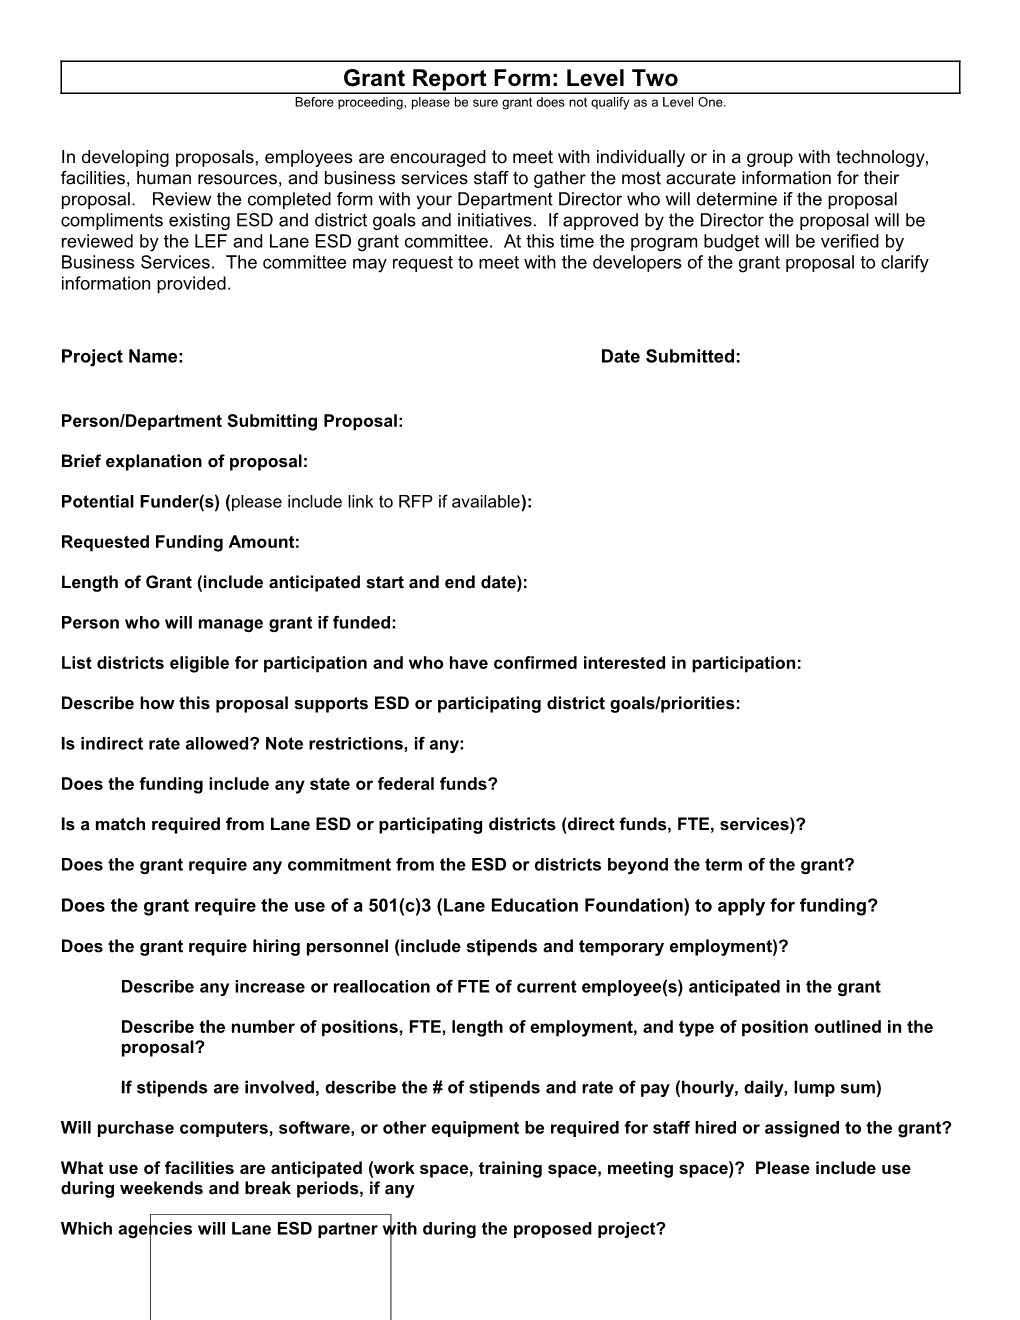 Level One Grant Report Form